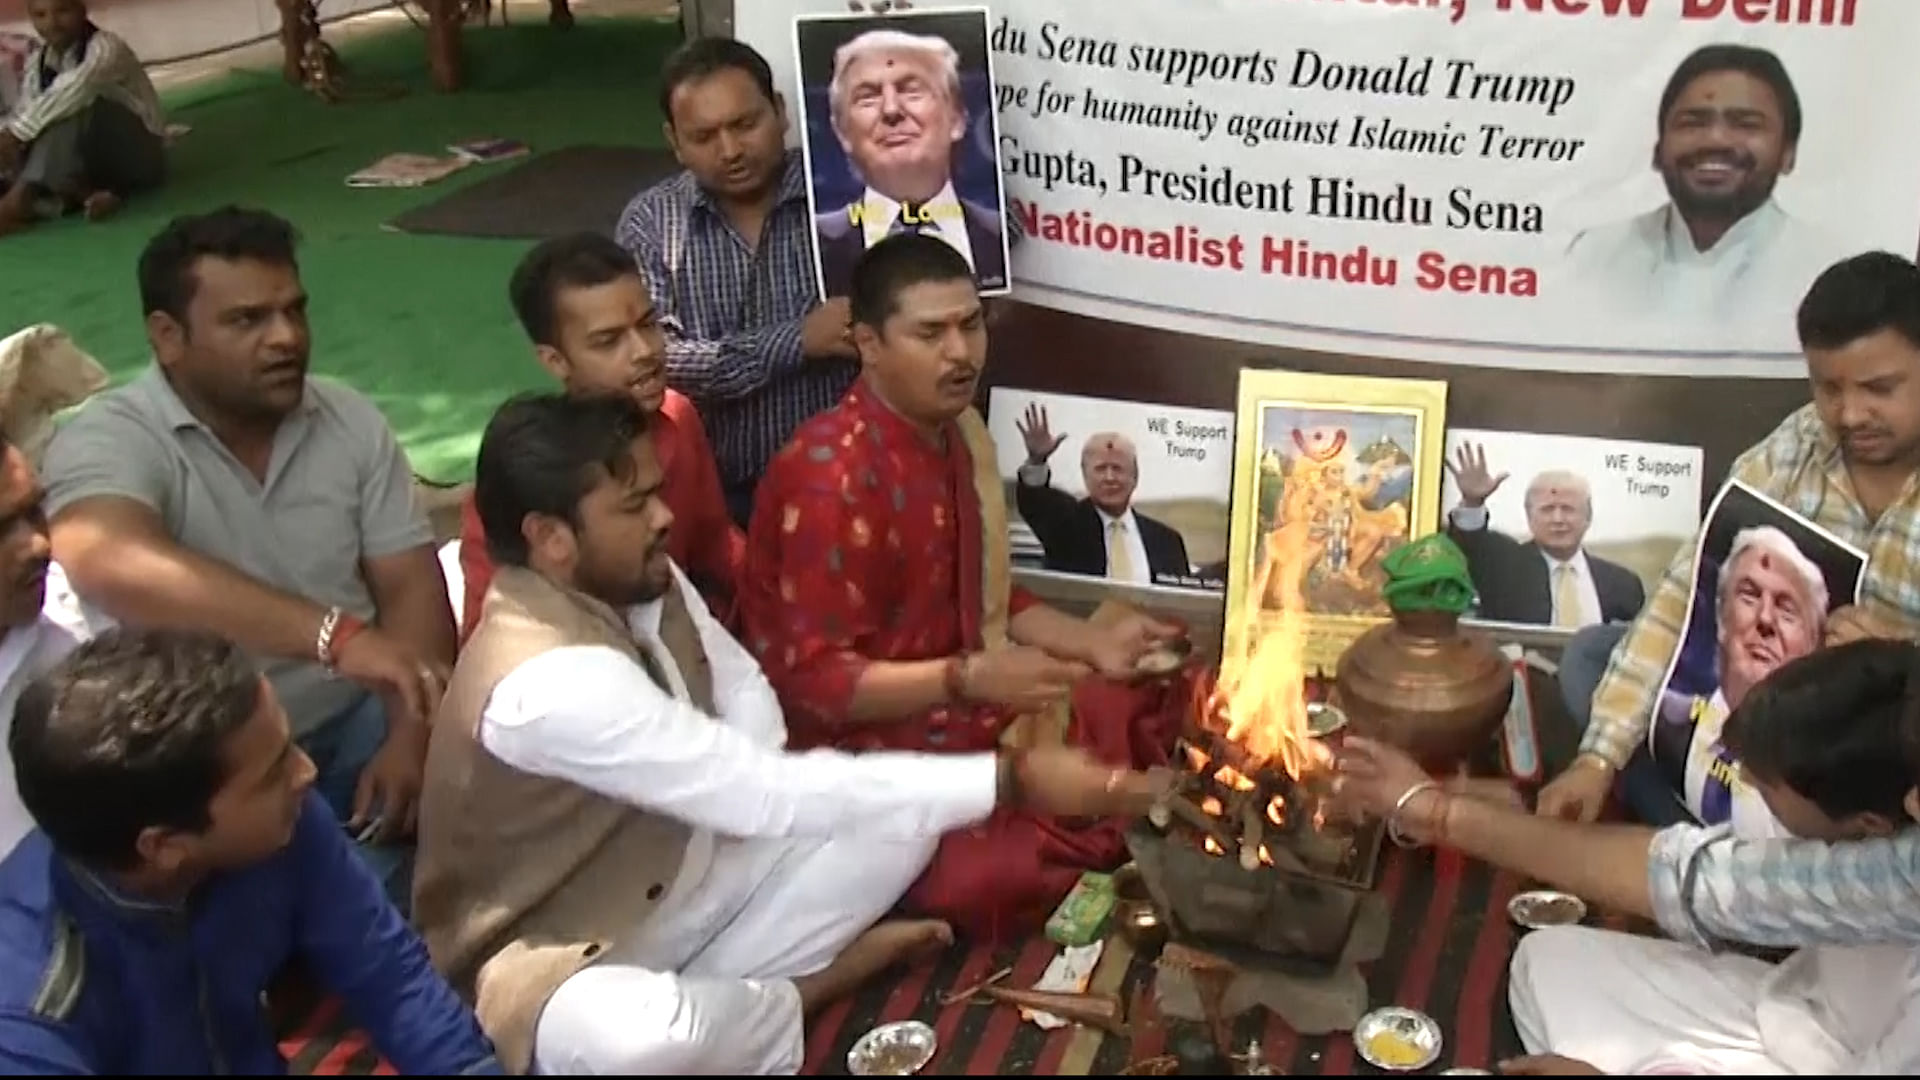 Fire ritual in invocation to the Hindu gods, to help Donald Trump win the US Presidential Election. (Photo: AP Screengrab)